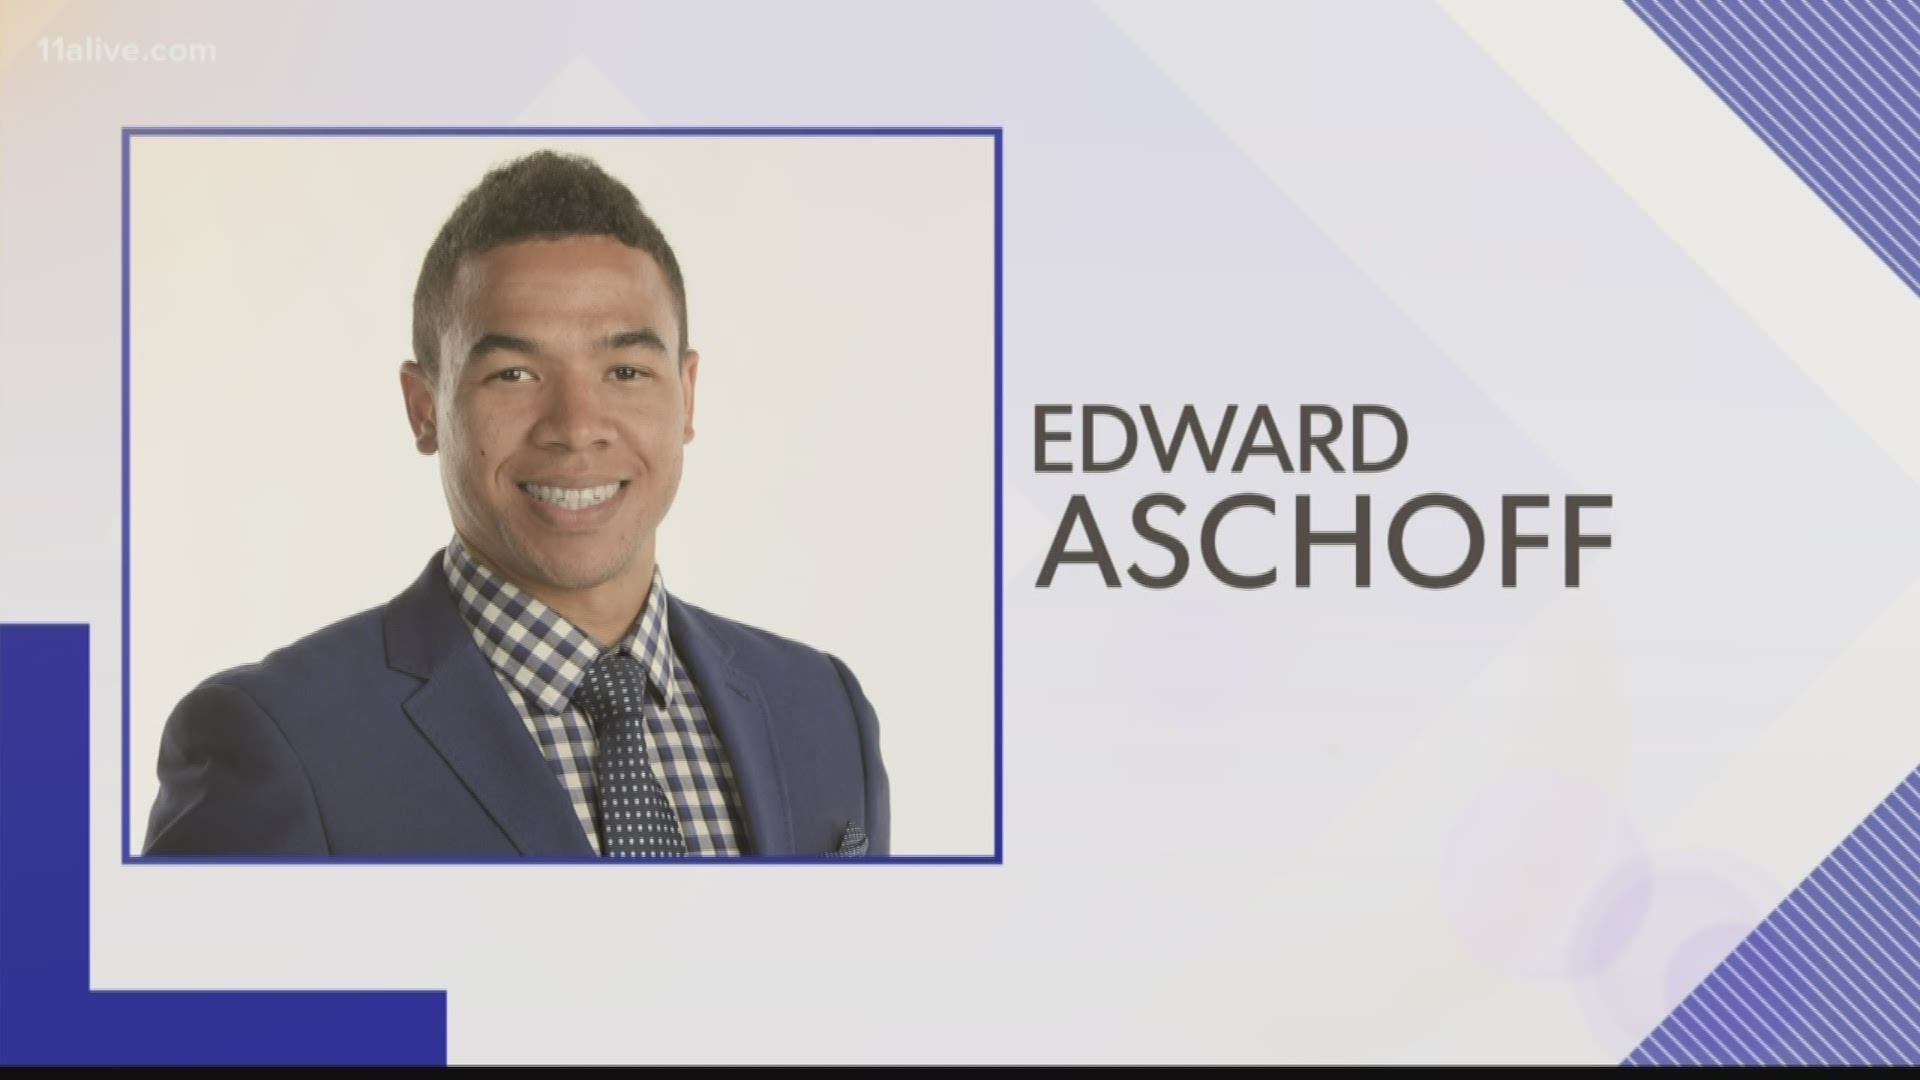 Edward Aschoff, a college football reporter, died after what the network described as as "brief illness."